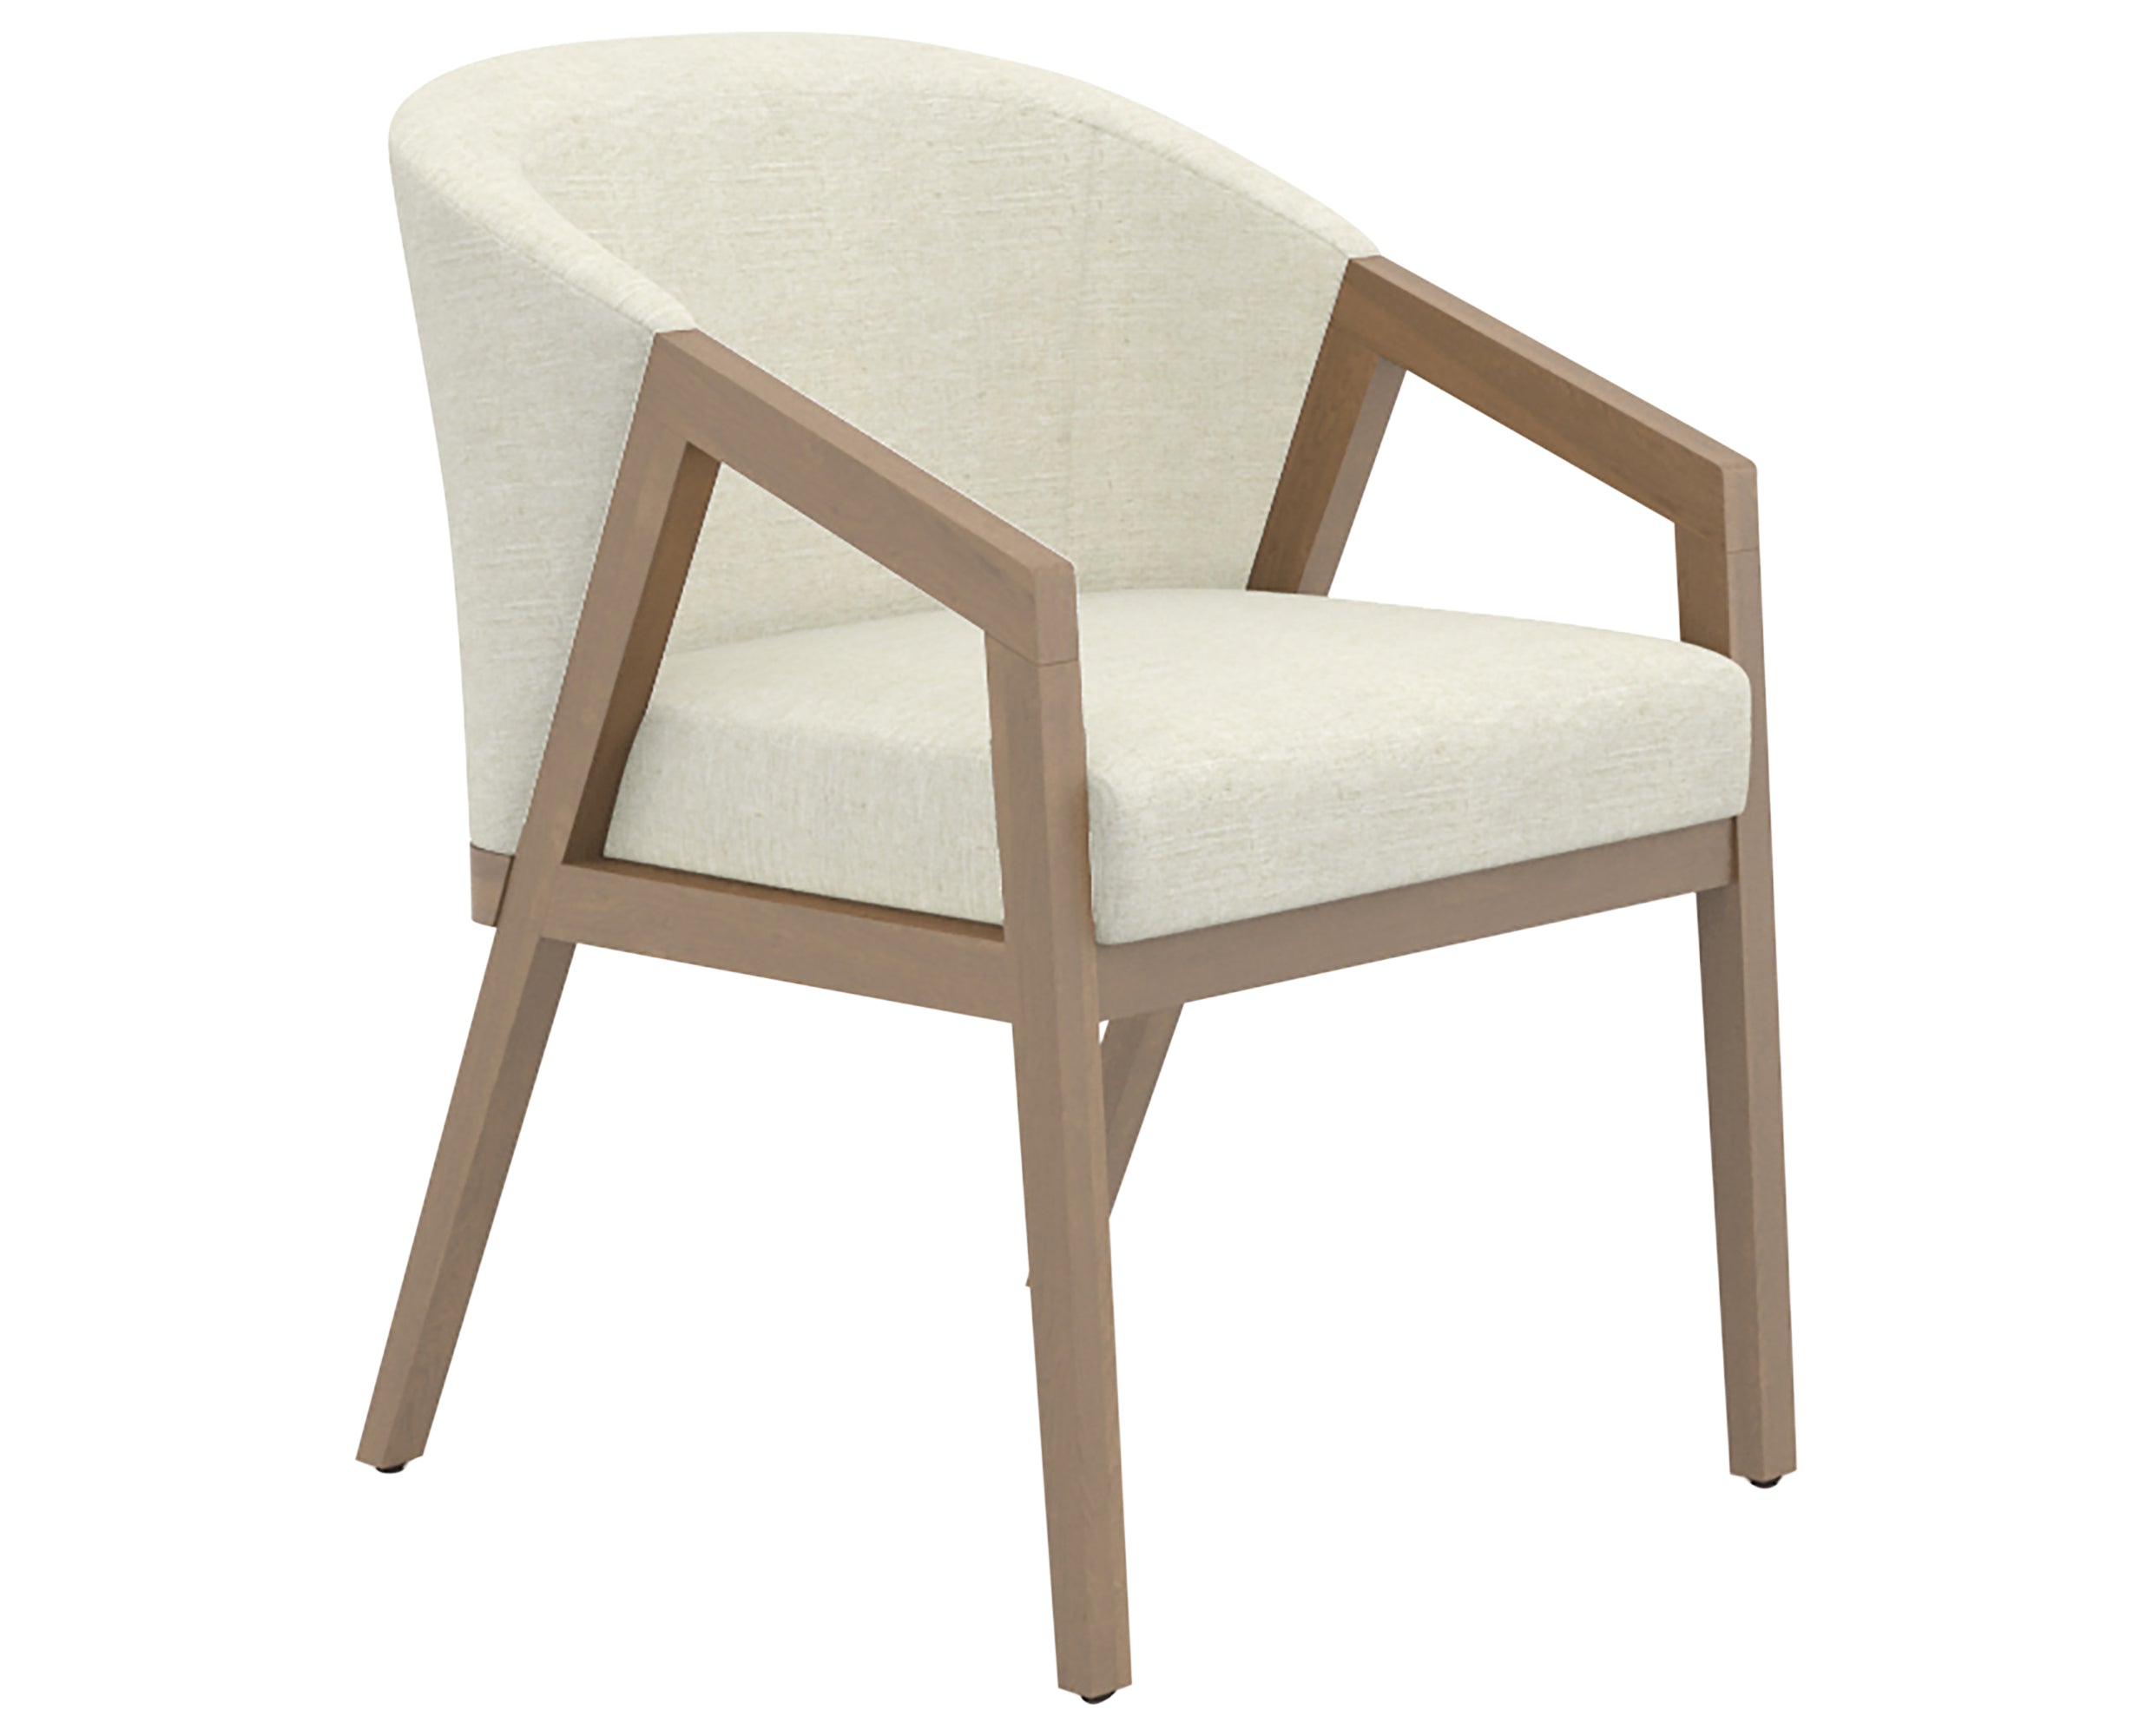 Pecan Washed &amp; Fabric TW | Canadel Modern Dining Chair 5178 | Valley Ridge Furniture